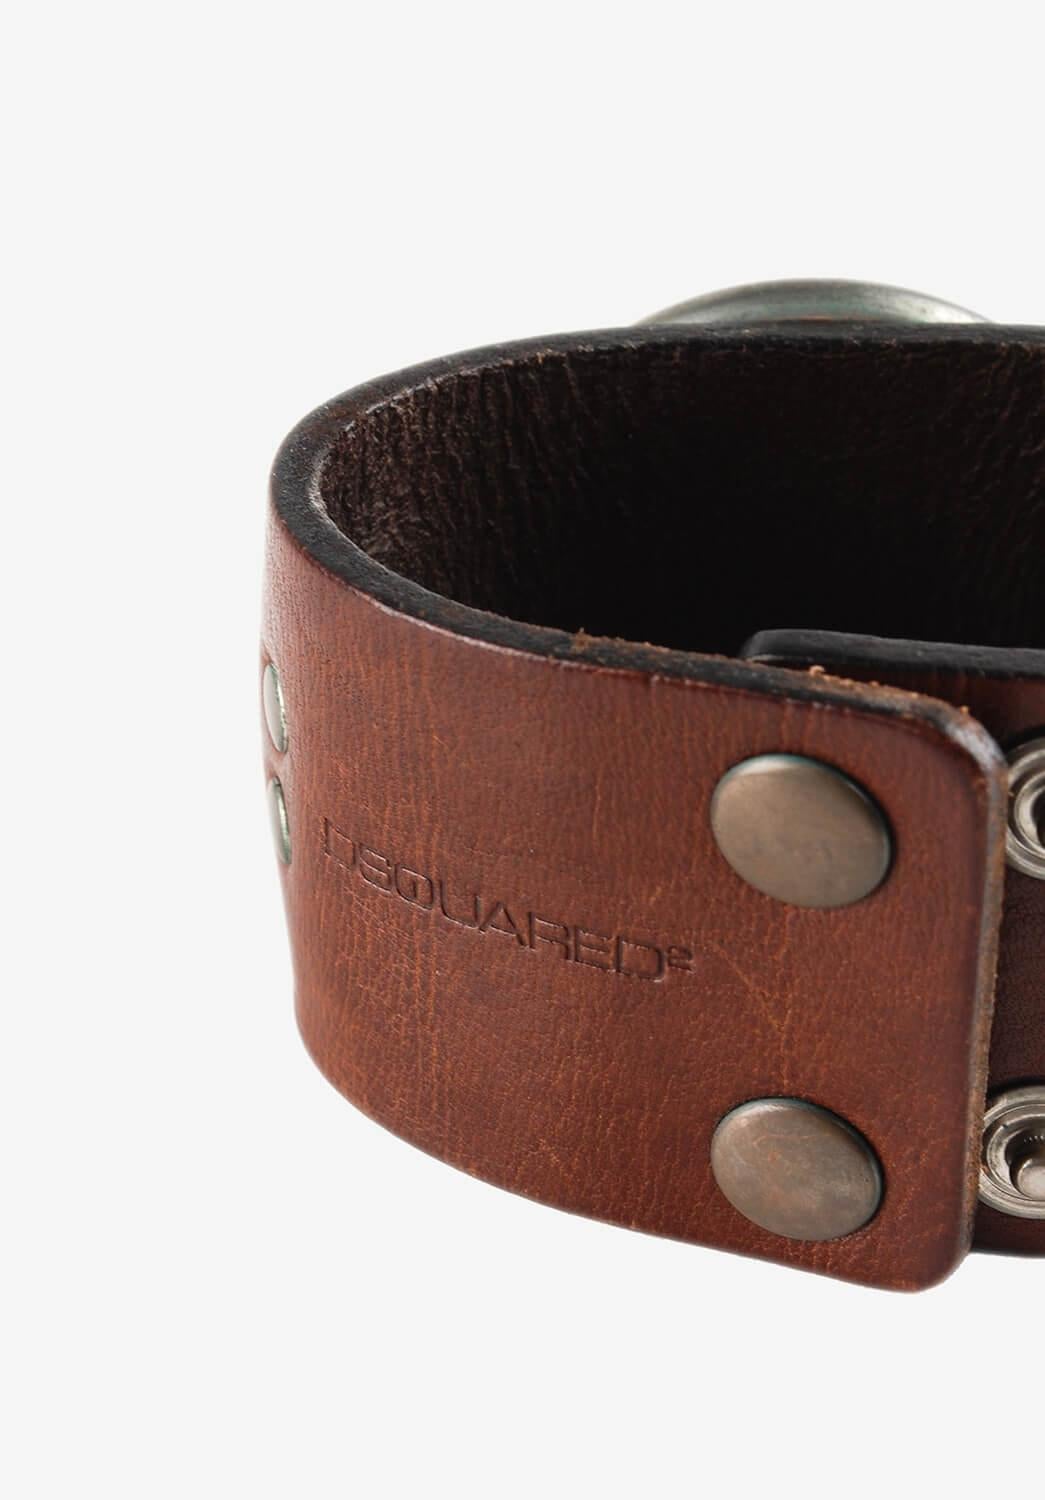 Dsquared2 Men Leather Bracelet Metalic, One size In Good Condition For Sale In Kaunas, LT